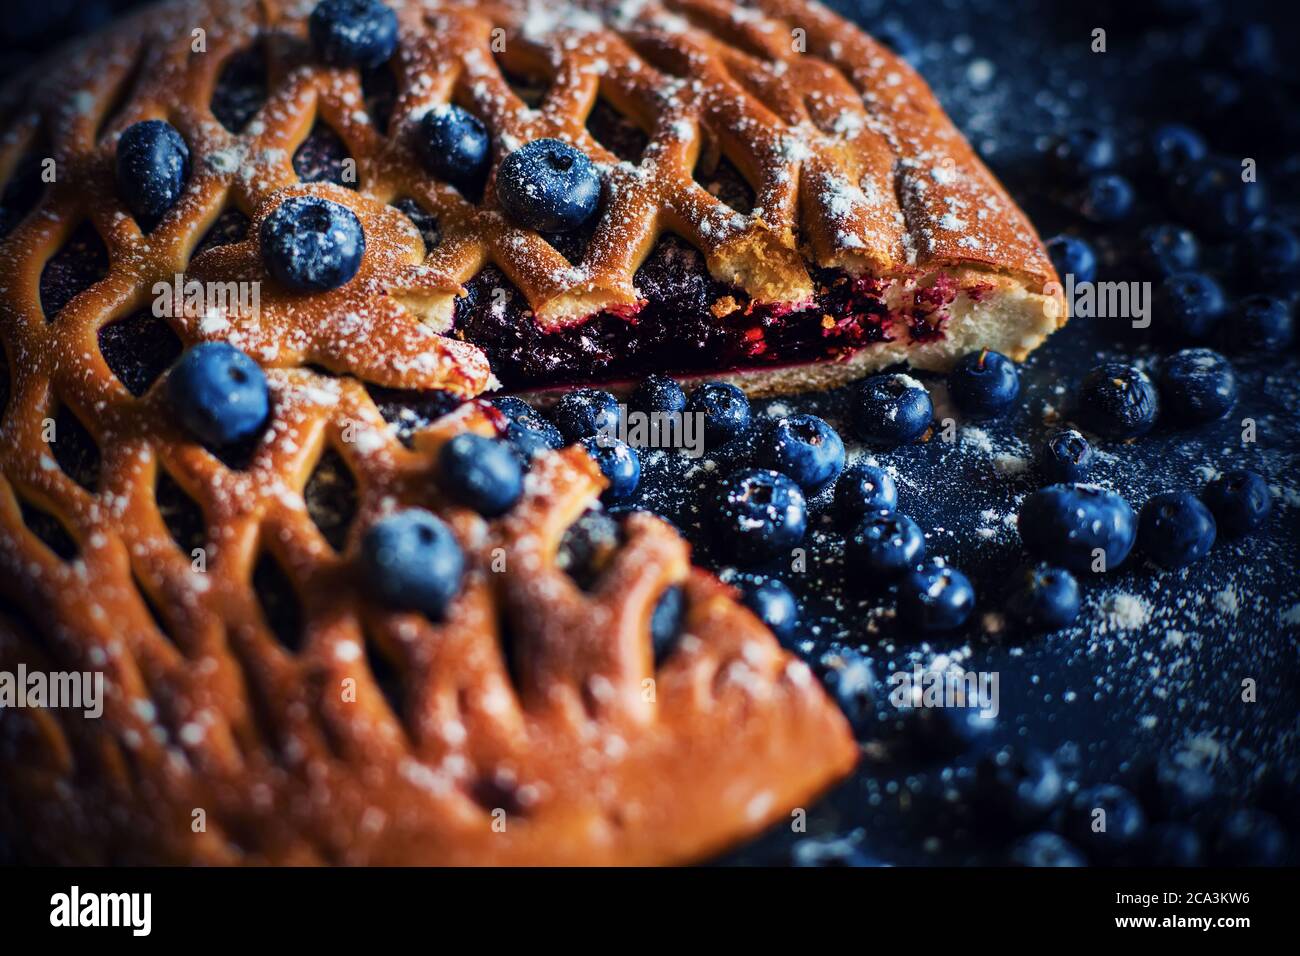 A round cut sweet pie with blueberry jam, next to which are ripe blue blueberries on a dark tray. Homemade cake. Stock Photo